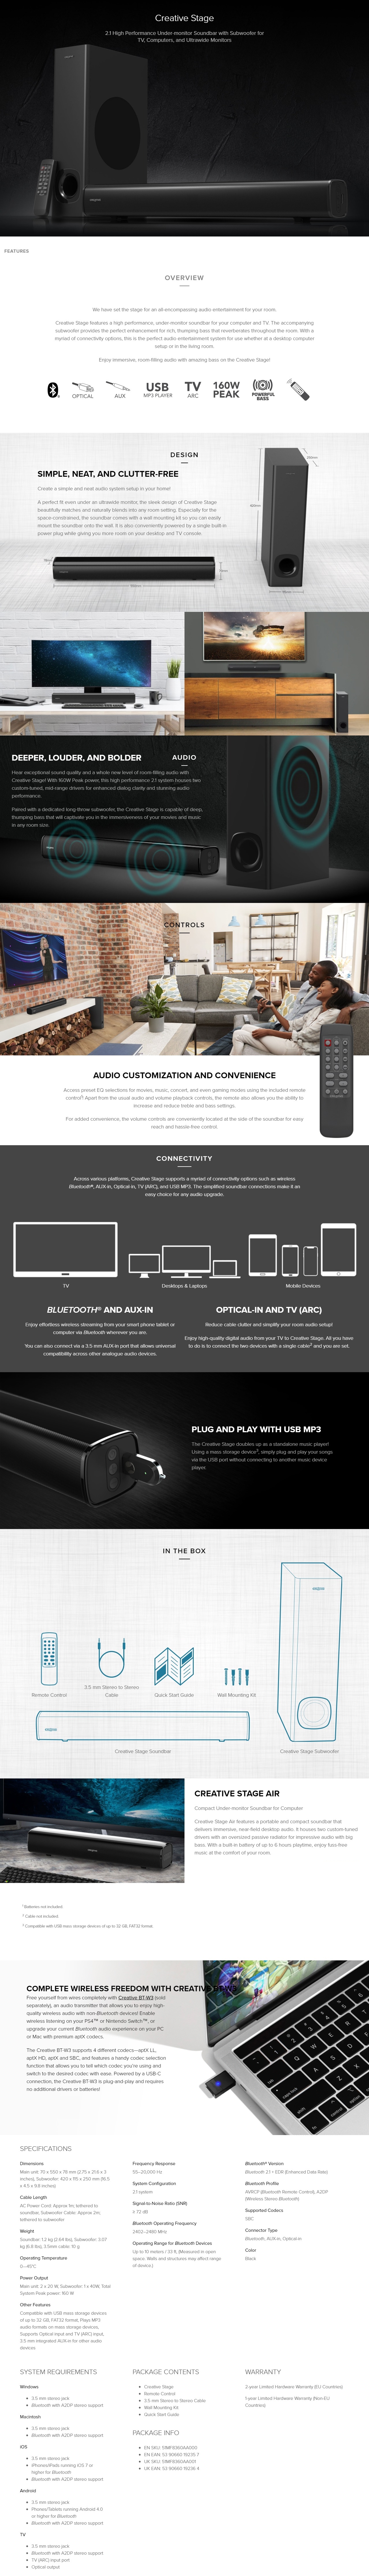 A large marketing image providing additional information about the product Creative Stage 2.1 High Performance Monitor Soundbar - Additional alt info not provided